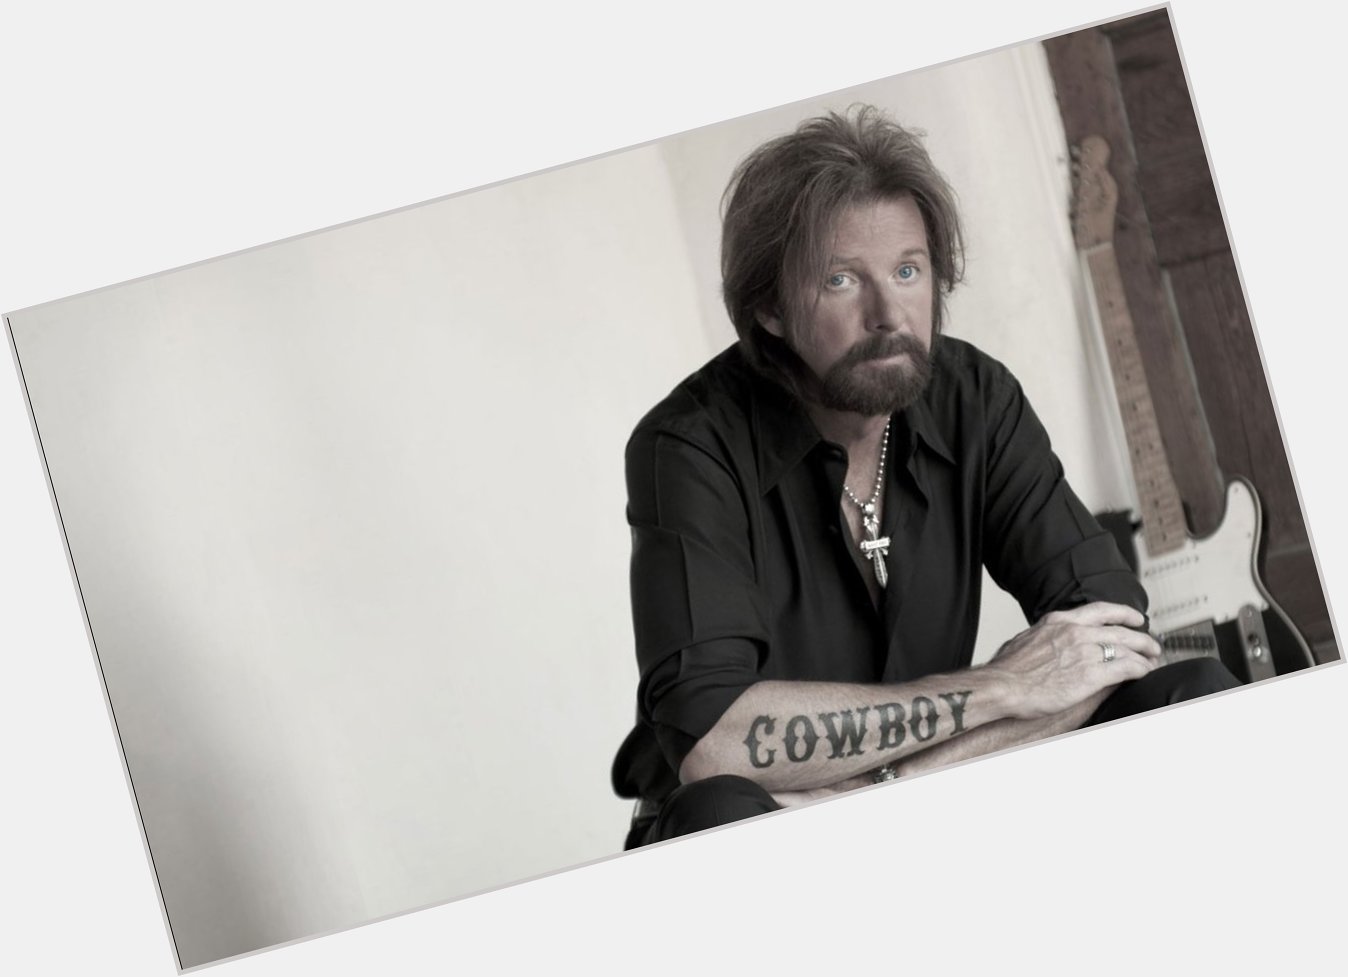 Happy Birthday Ronnie Dunn!
We\ll celebrate on Today in Country Music at 12:30 on THUNDER 1061 